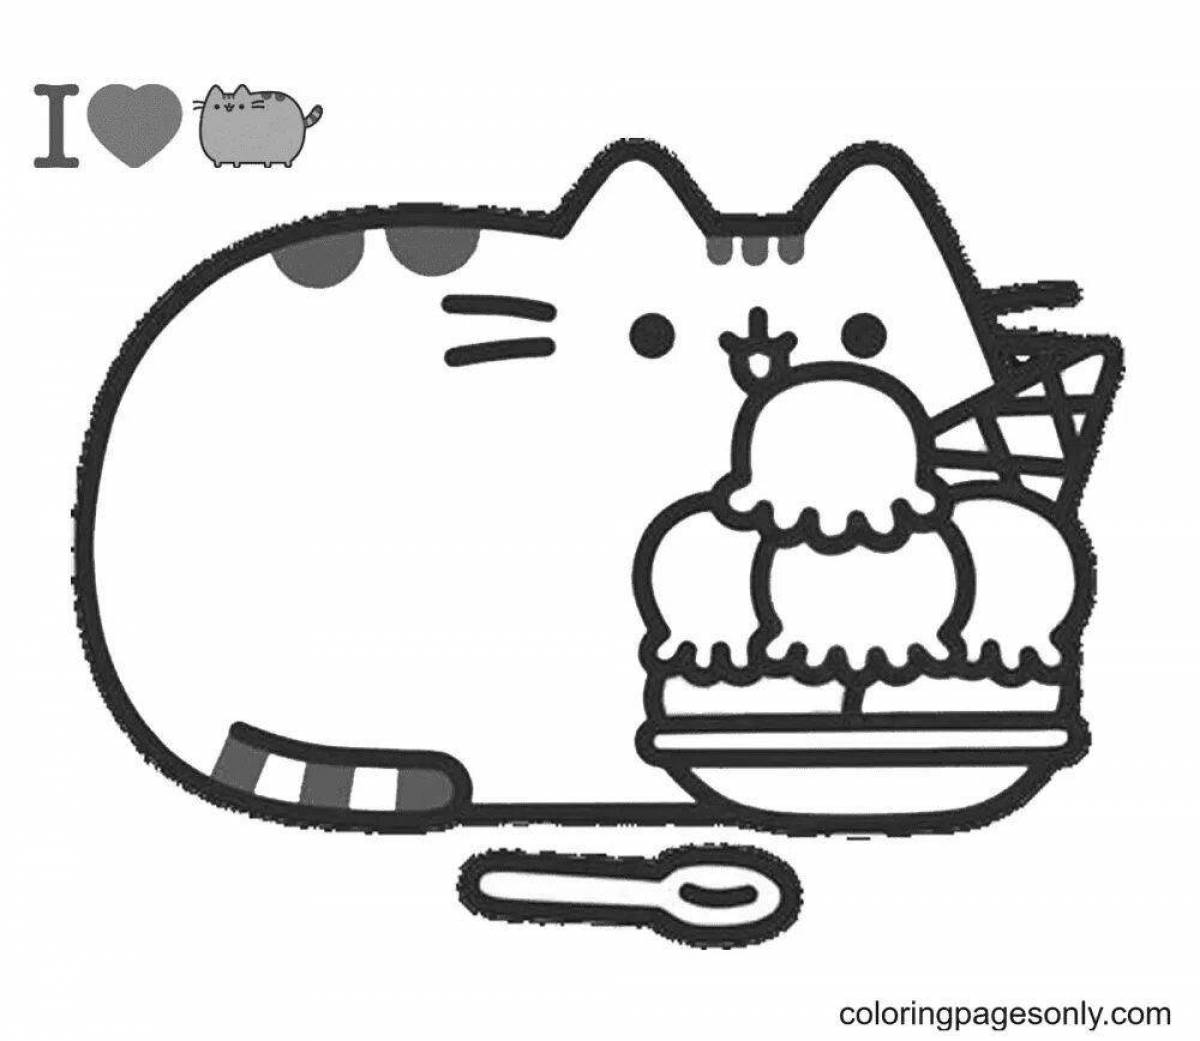 Adorable gray cat coloring page